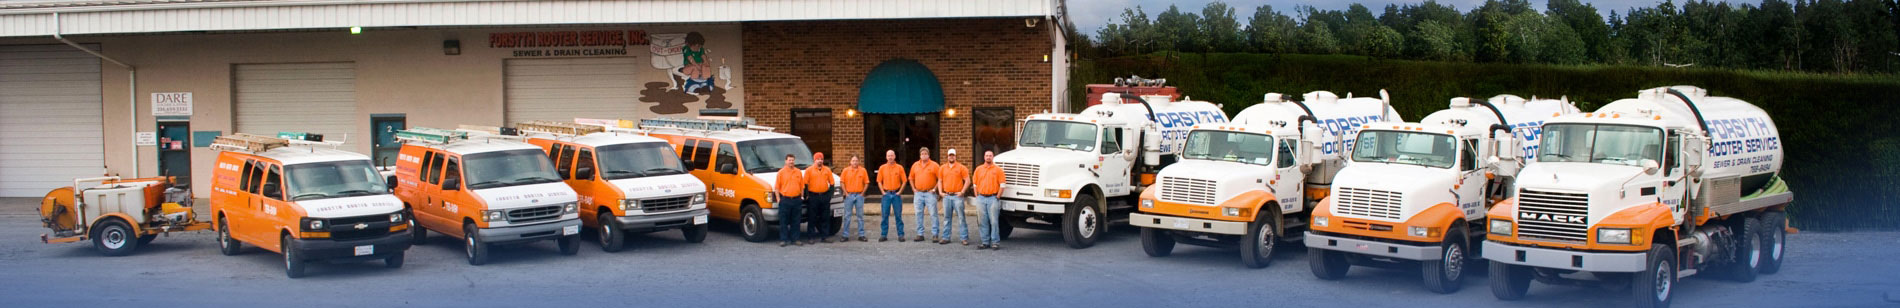 Forsyth Septic & Rooter Drain Cleaning Service Fleet